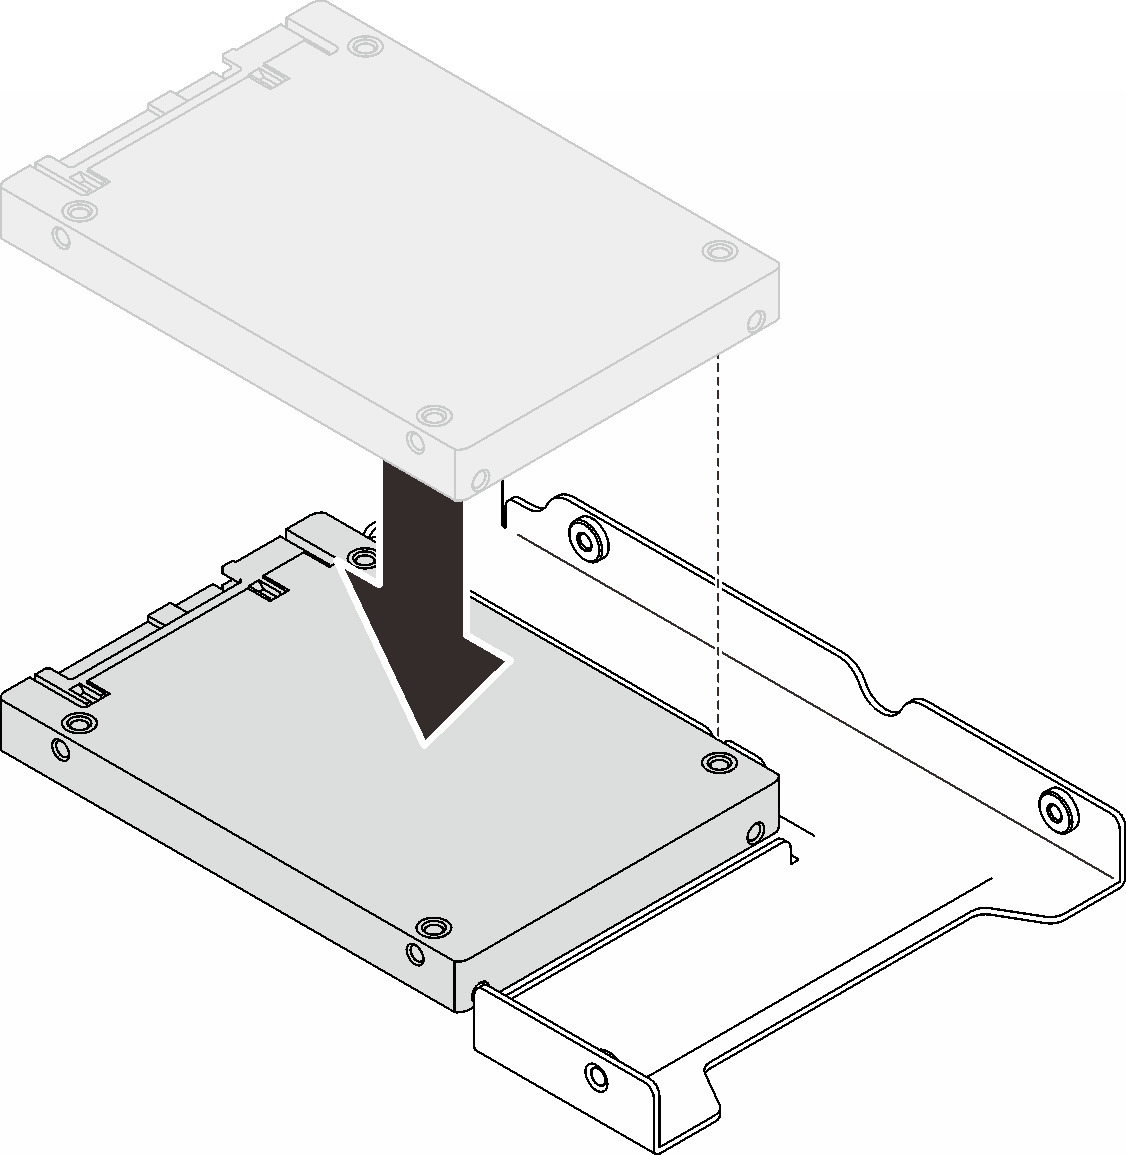 Positioning the 2.5-inch drive into the drive adapter